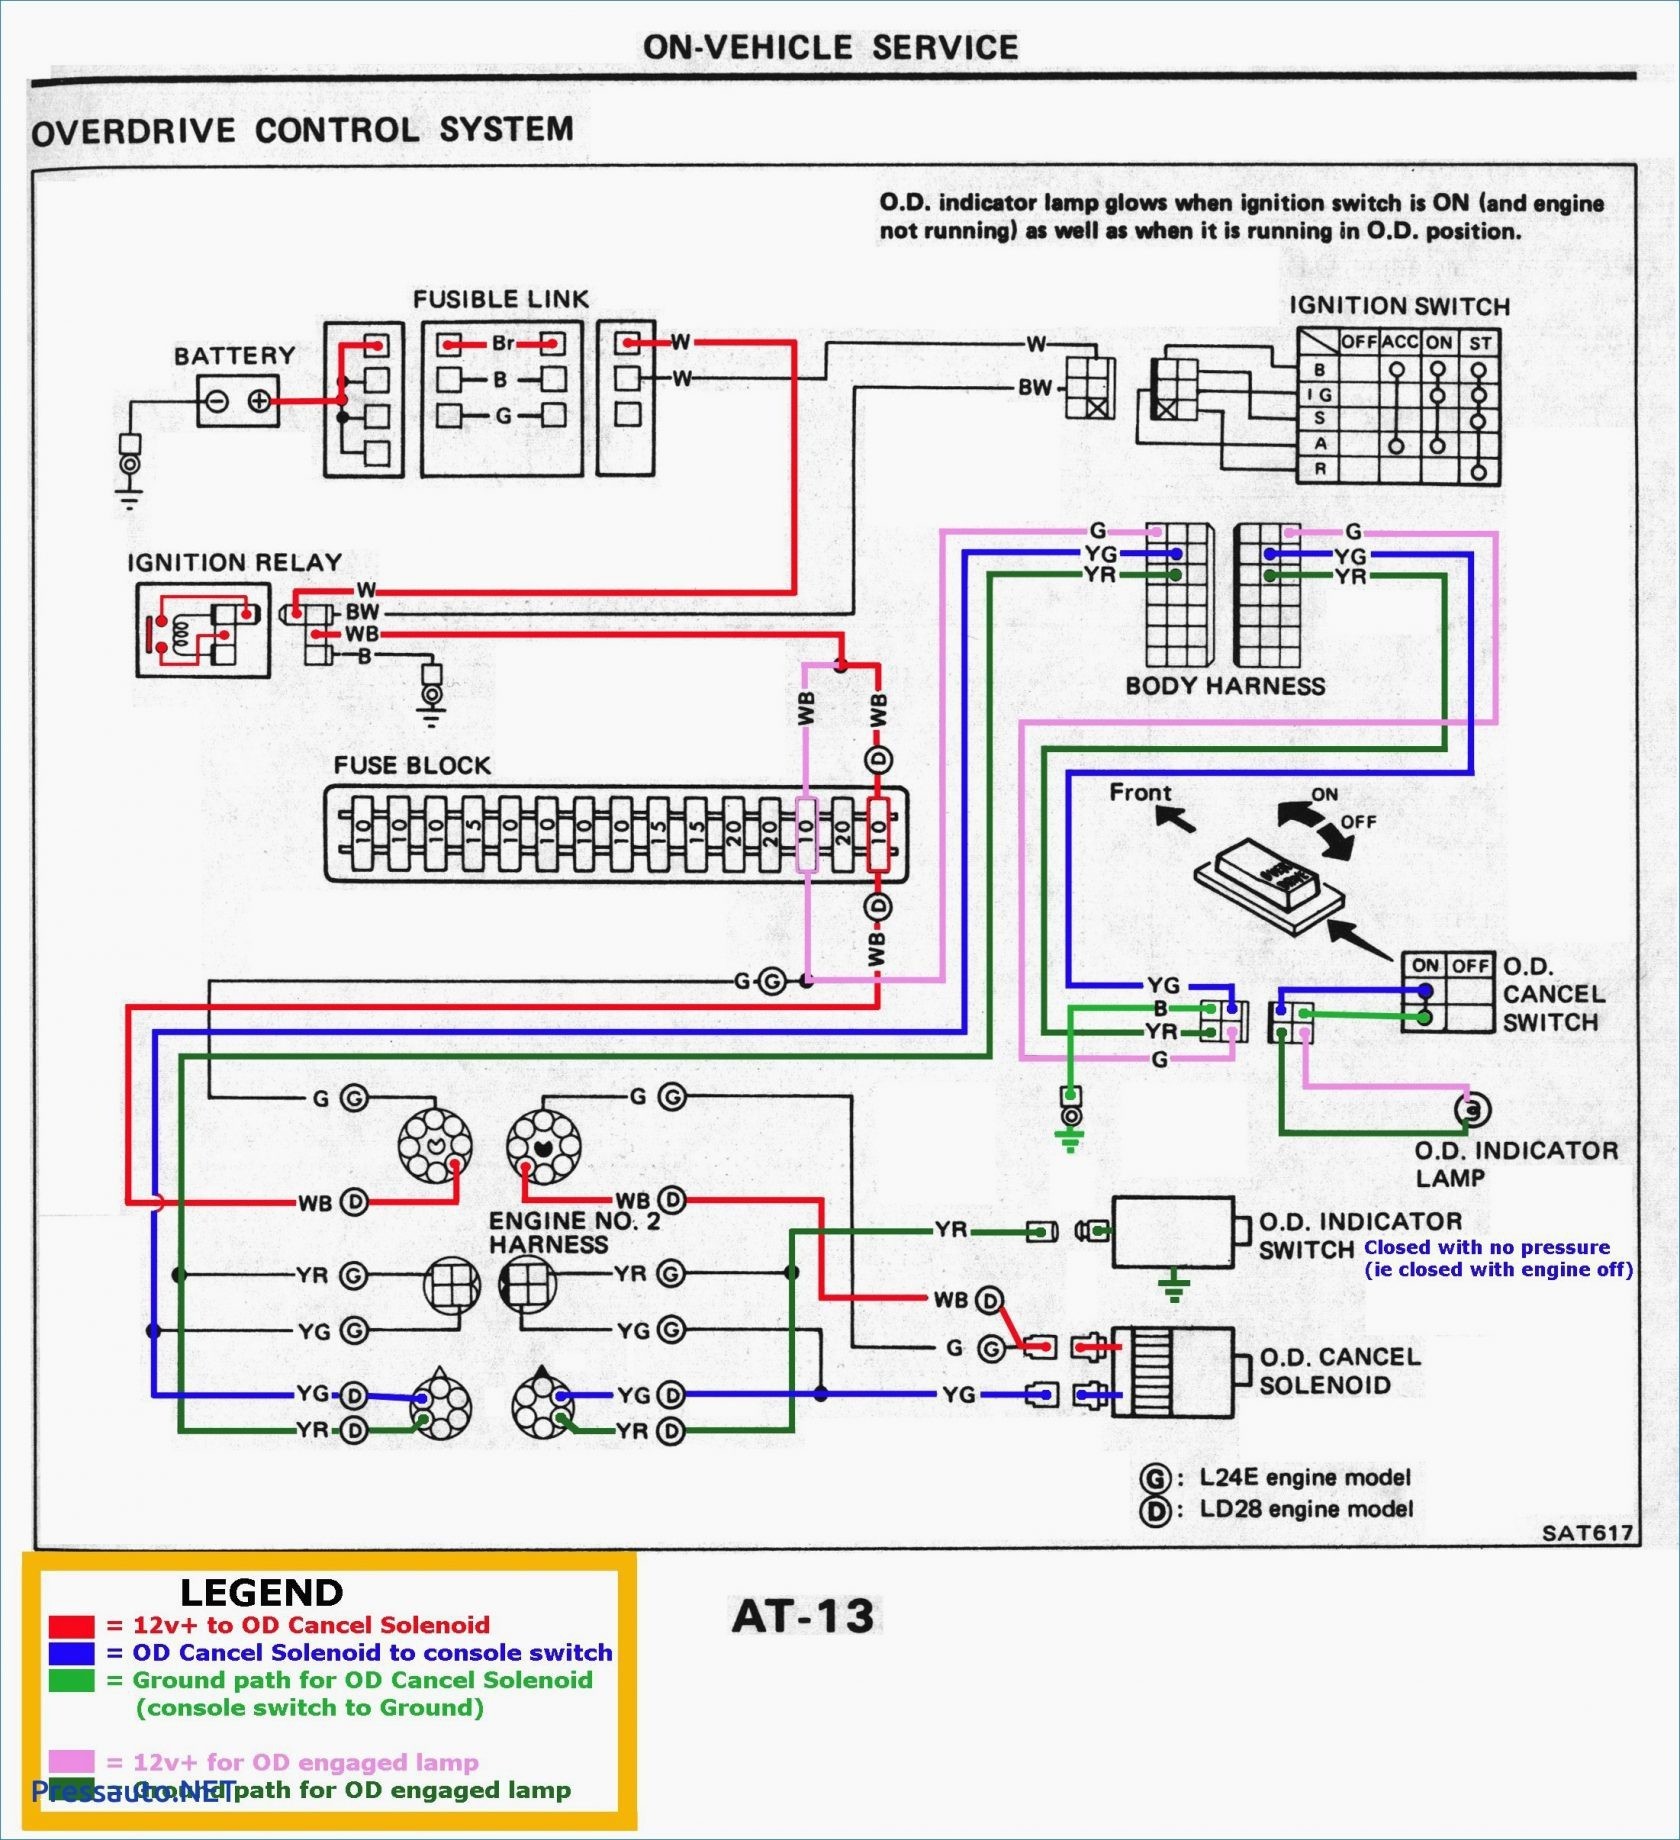 Relay Wiring Diagram for Starter New Ignition Relay Wiring Diagram Fresh Starter solenoid Wiring Diagram